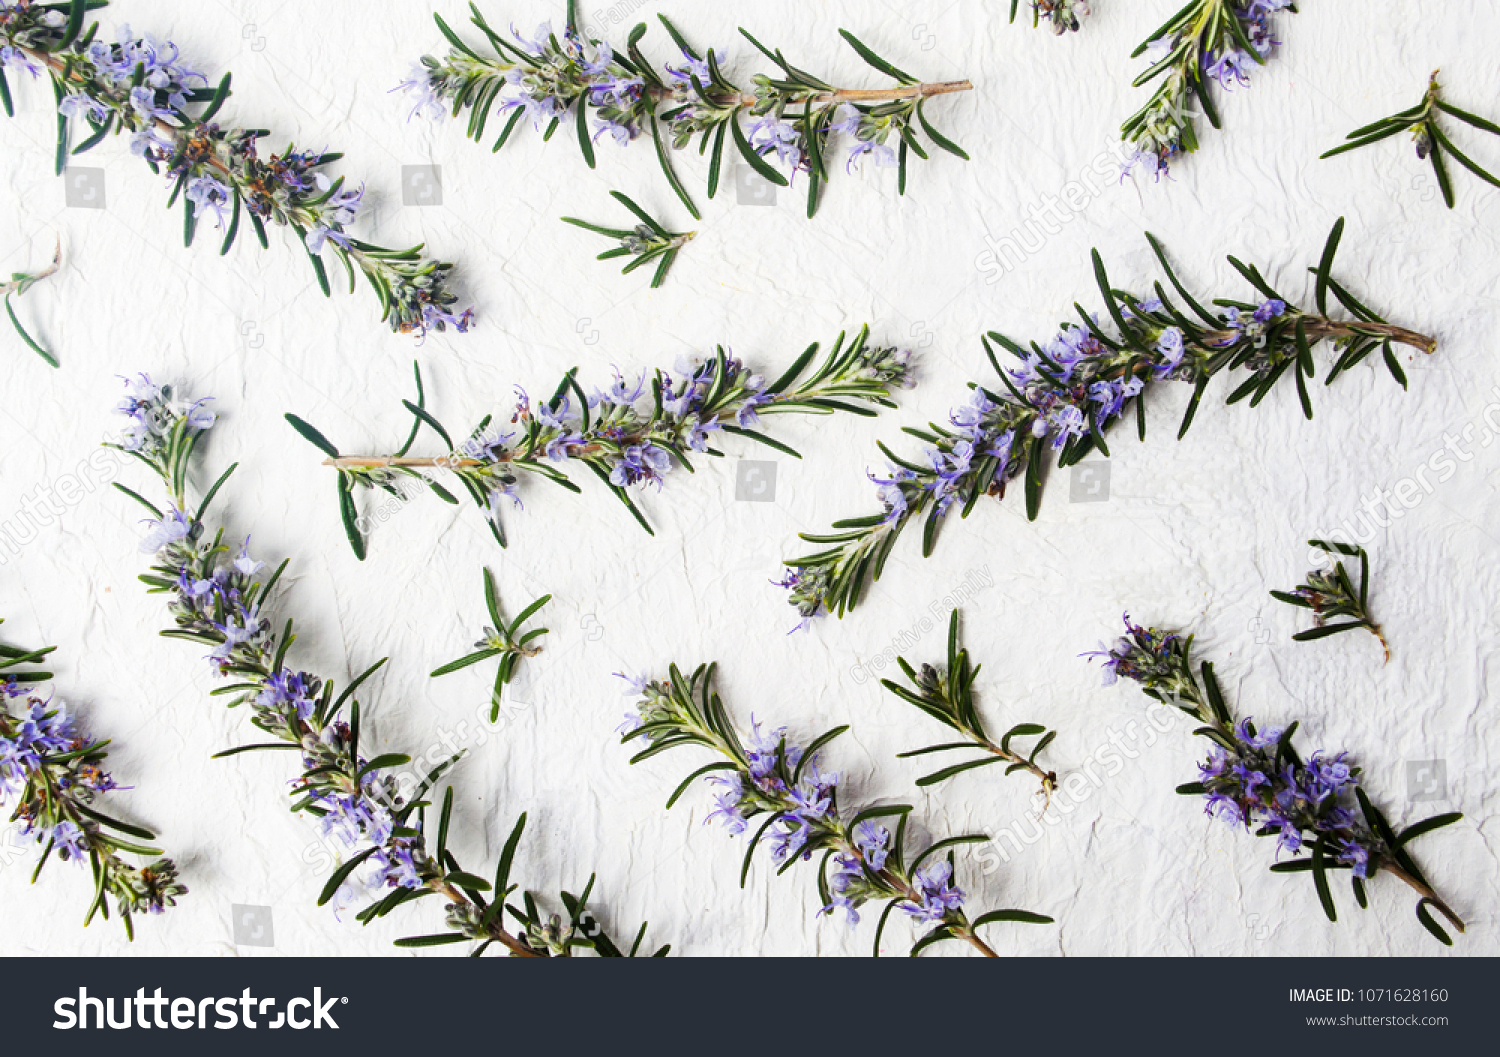 Rosemary branches in blossom on white background top view #1071628160